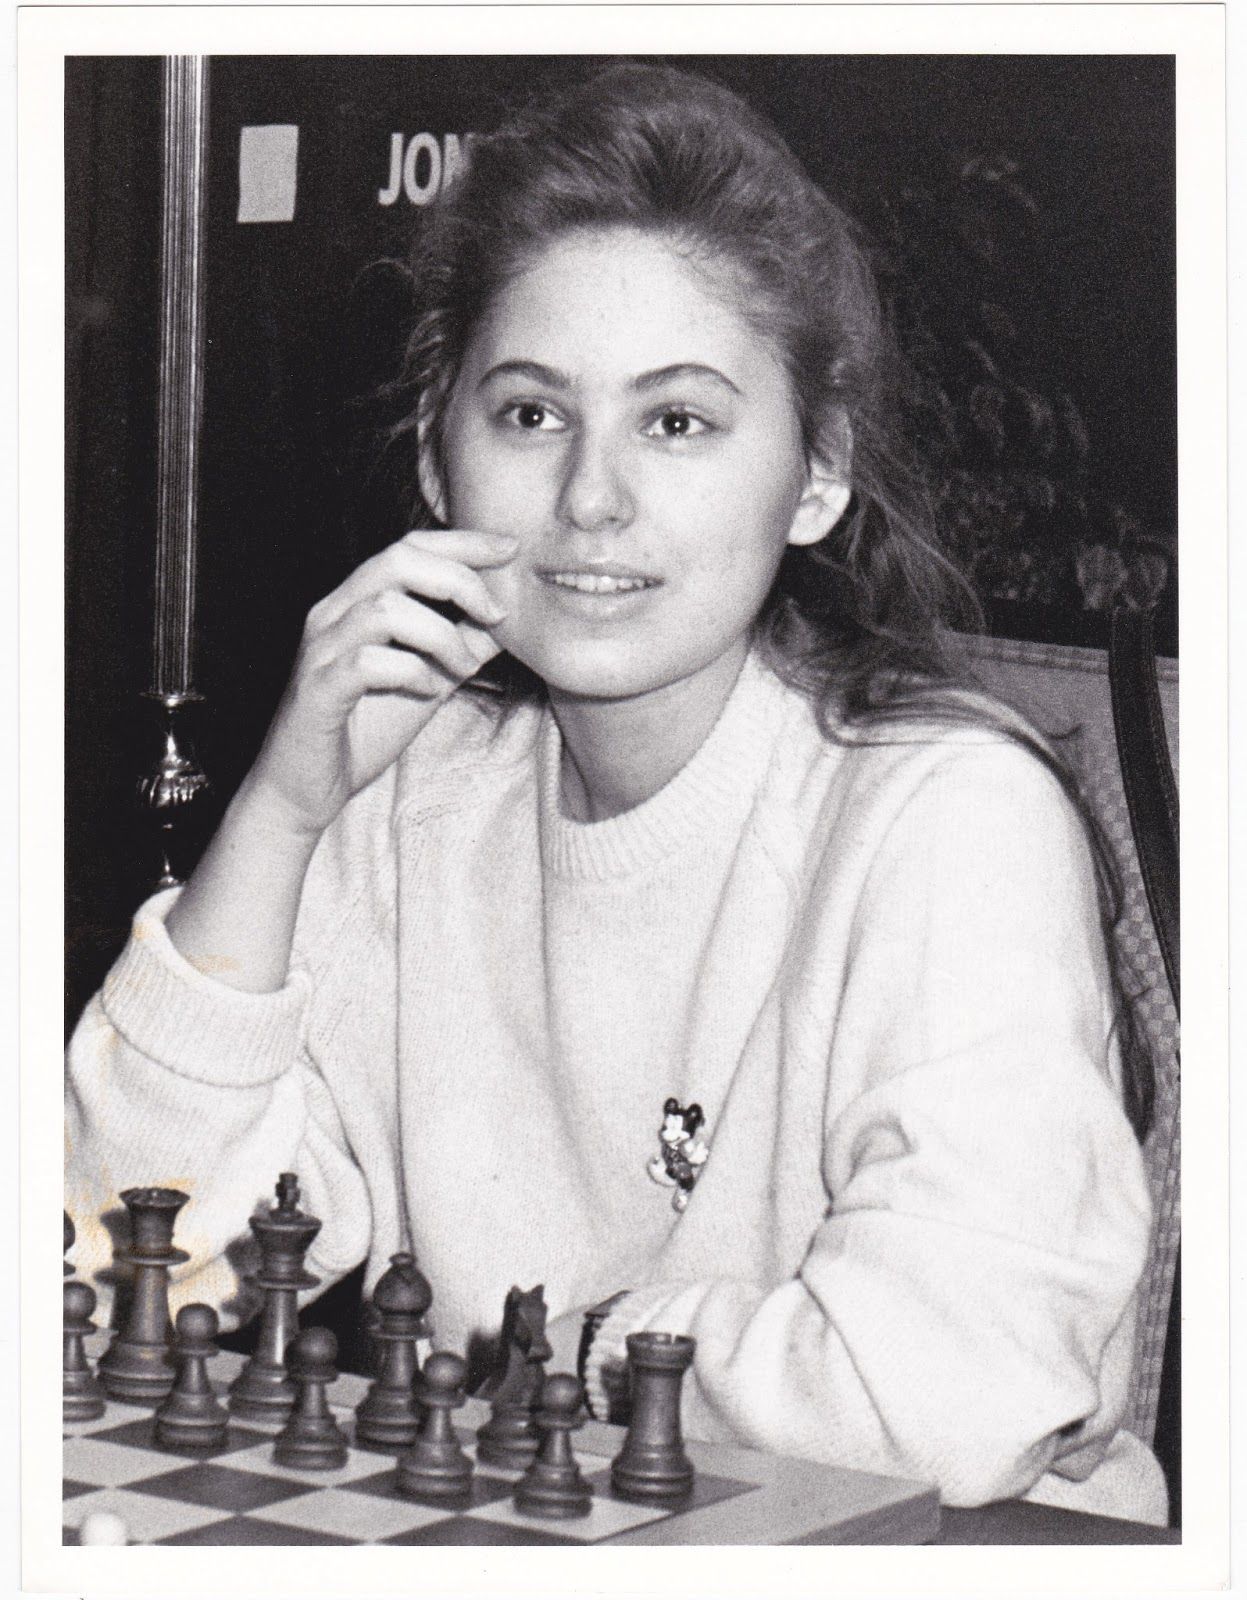 chess24 - Happy Birthday to Judit Polgar, the greatest female chess player  of all time!